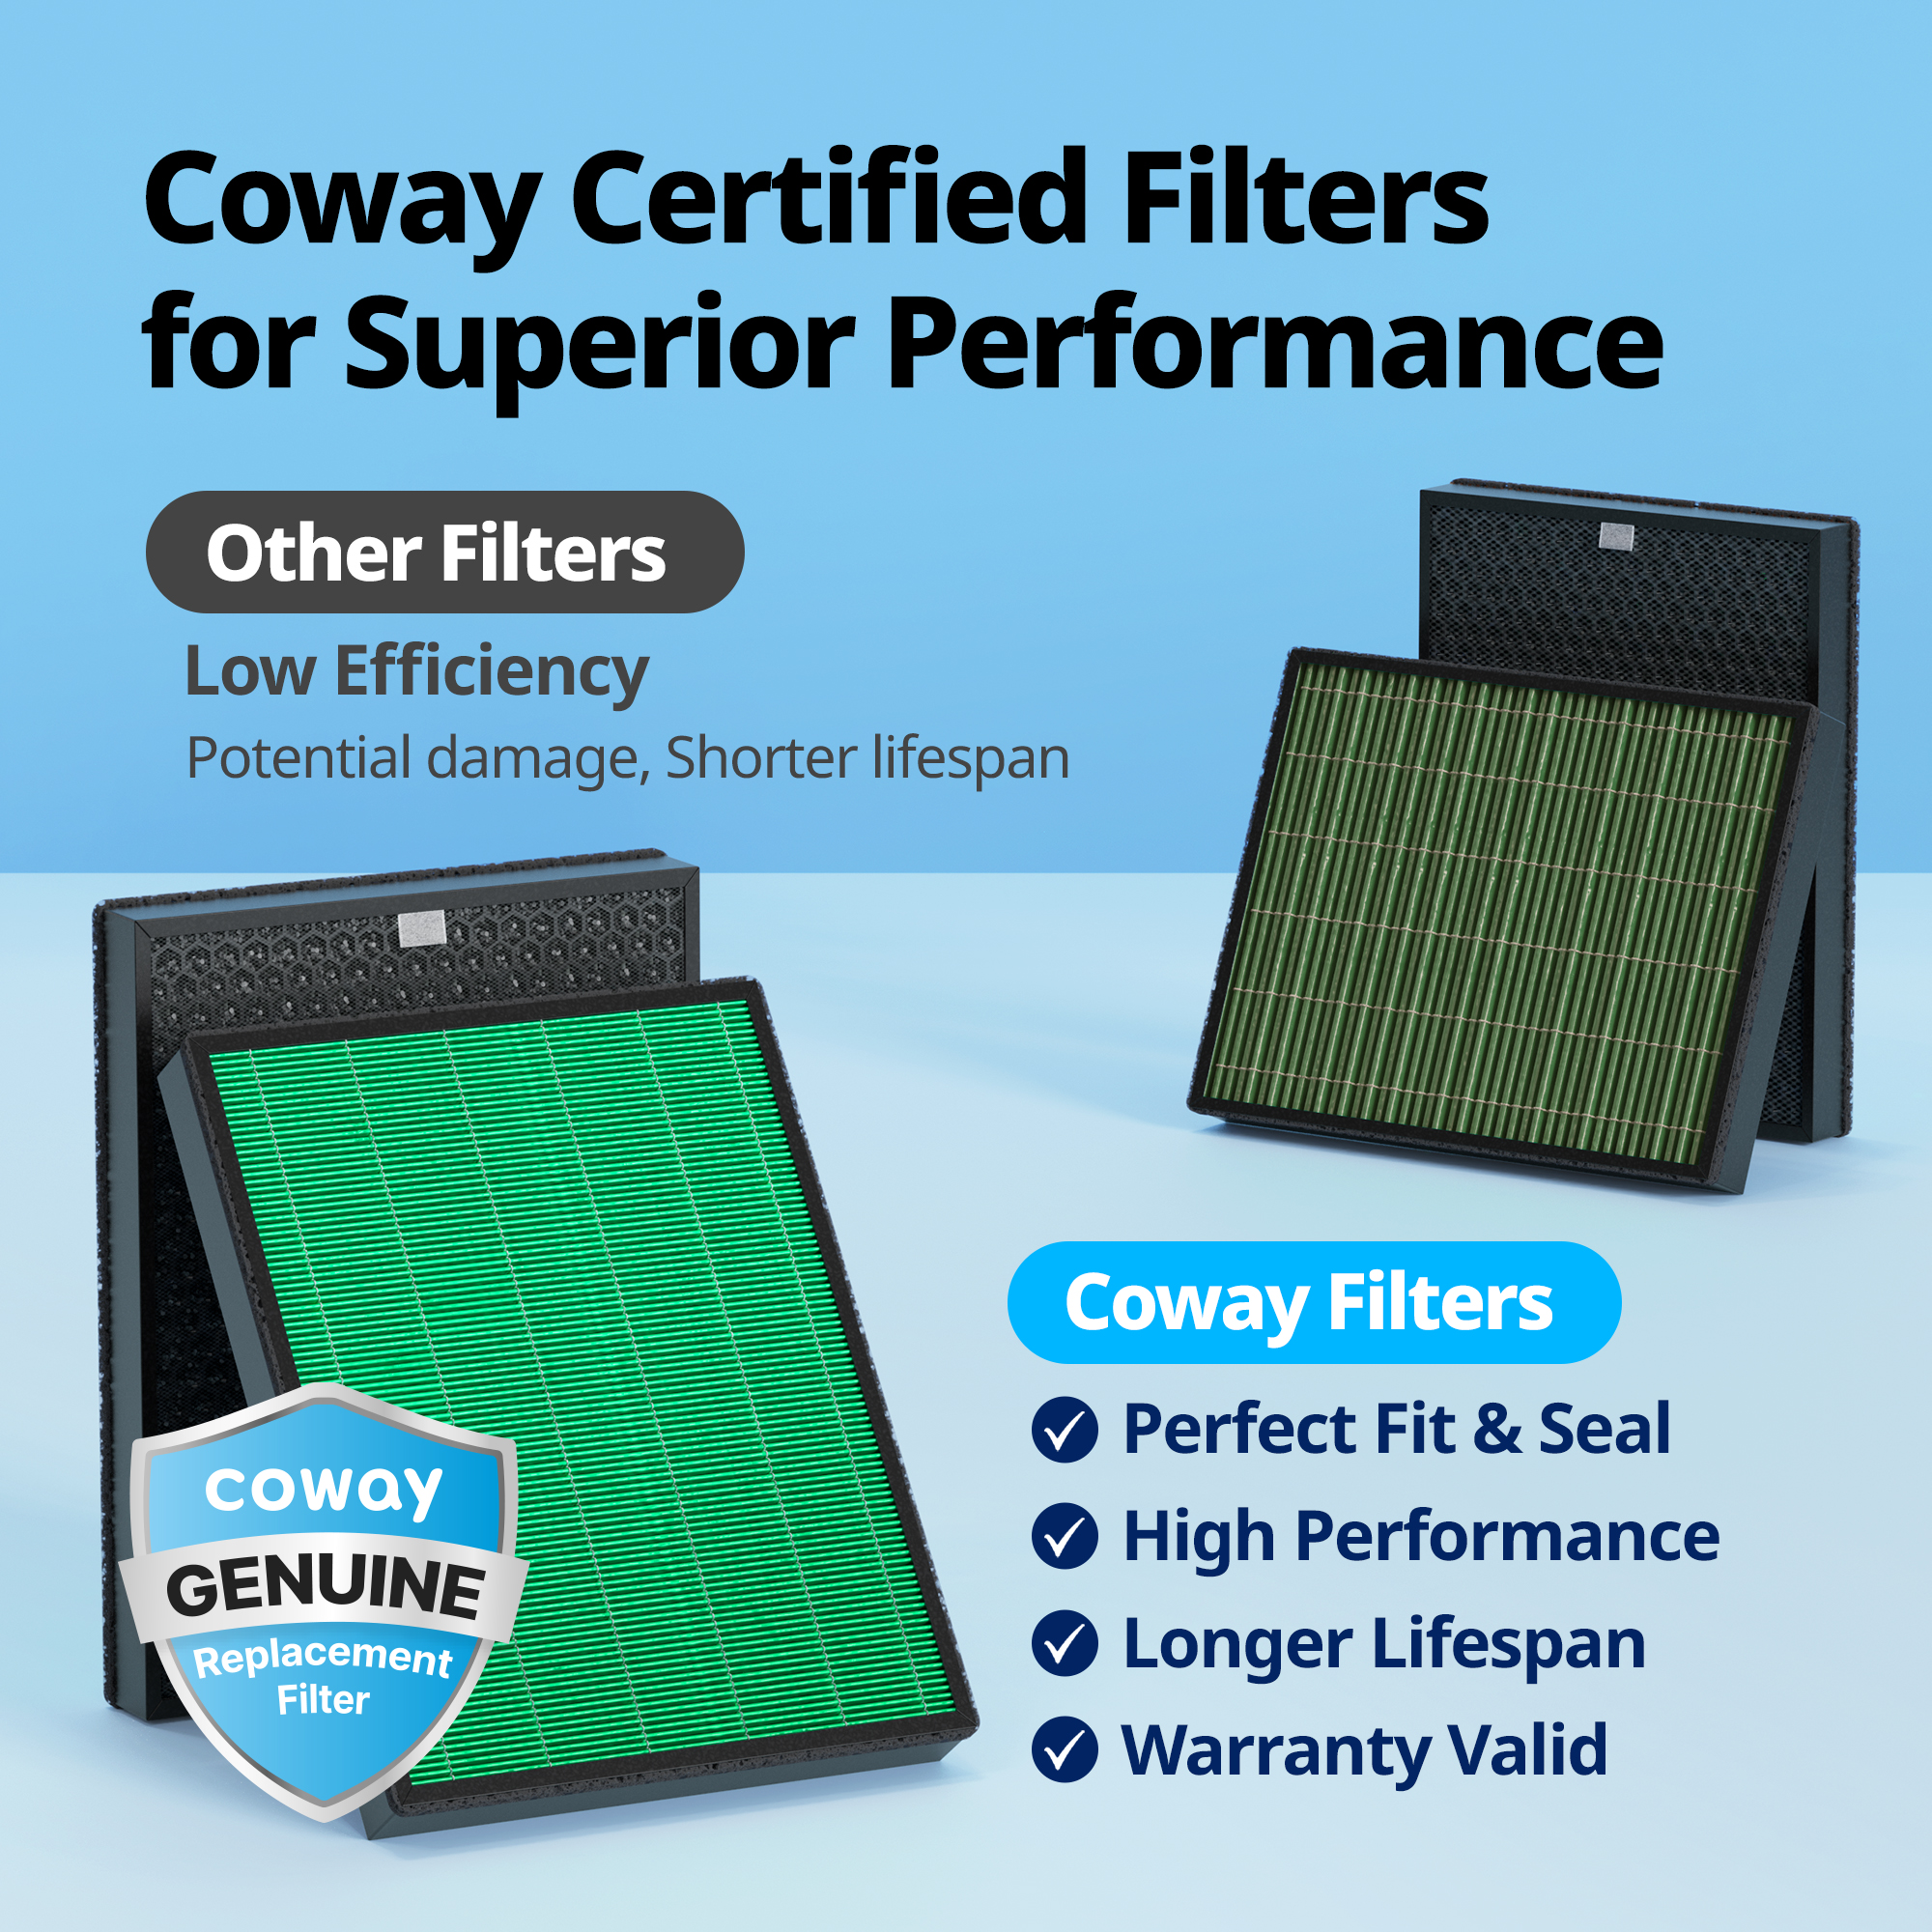 Coway Air Purifier Replacement Filter Airmega 400/400S (an average of 12-months lifespan with 1560 sq. ft coverage) - image 2 of 7